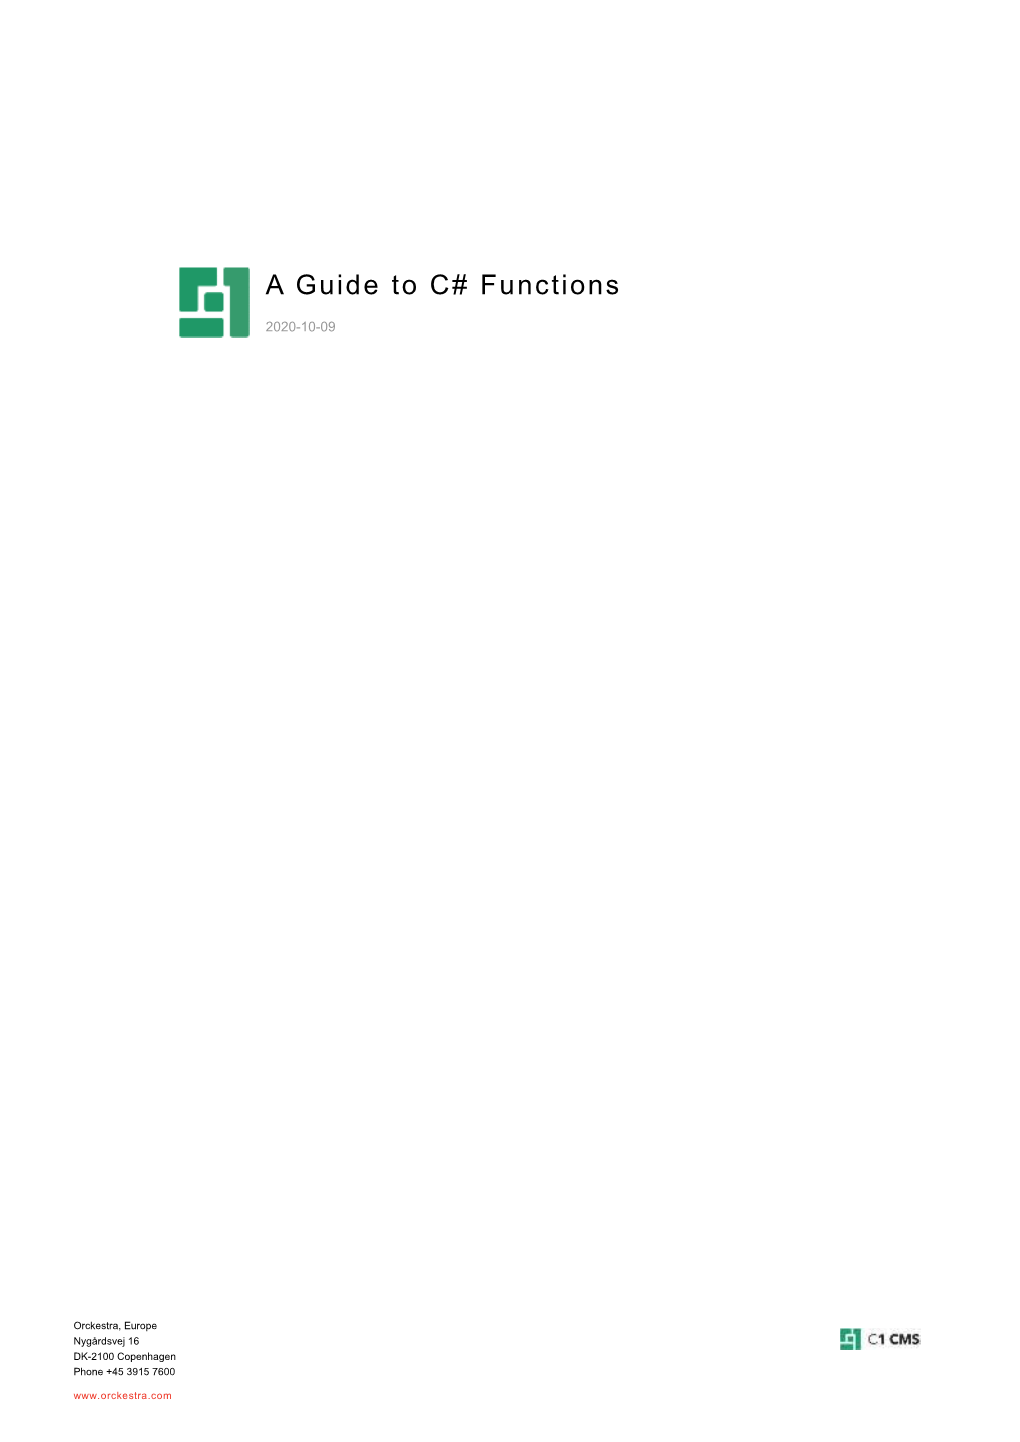 A Guide to C# Functions